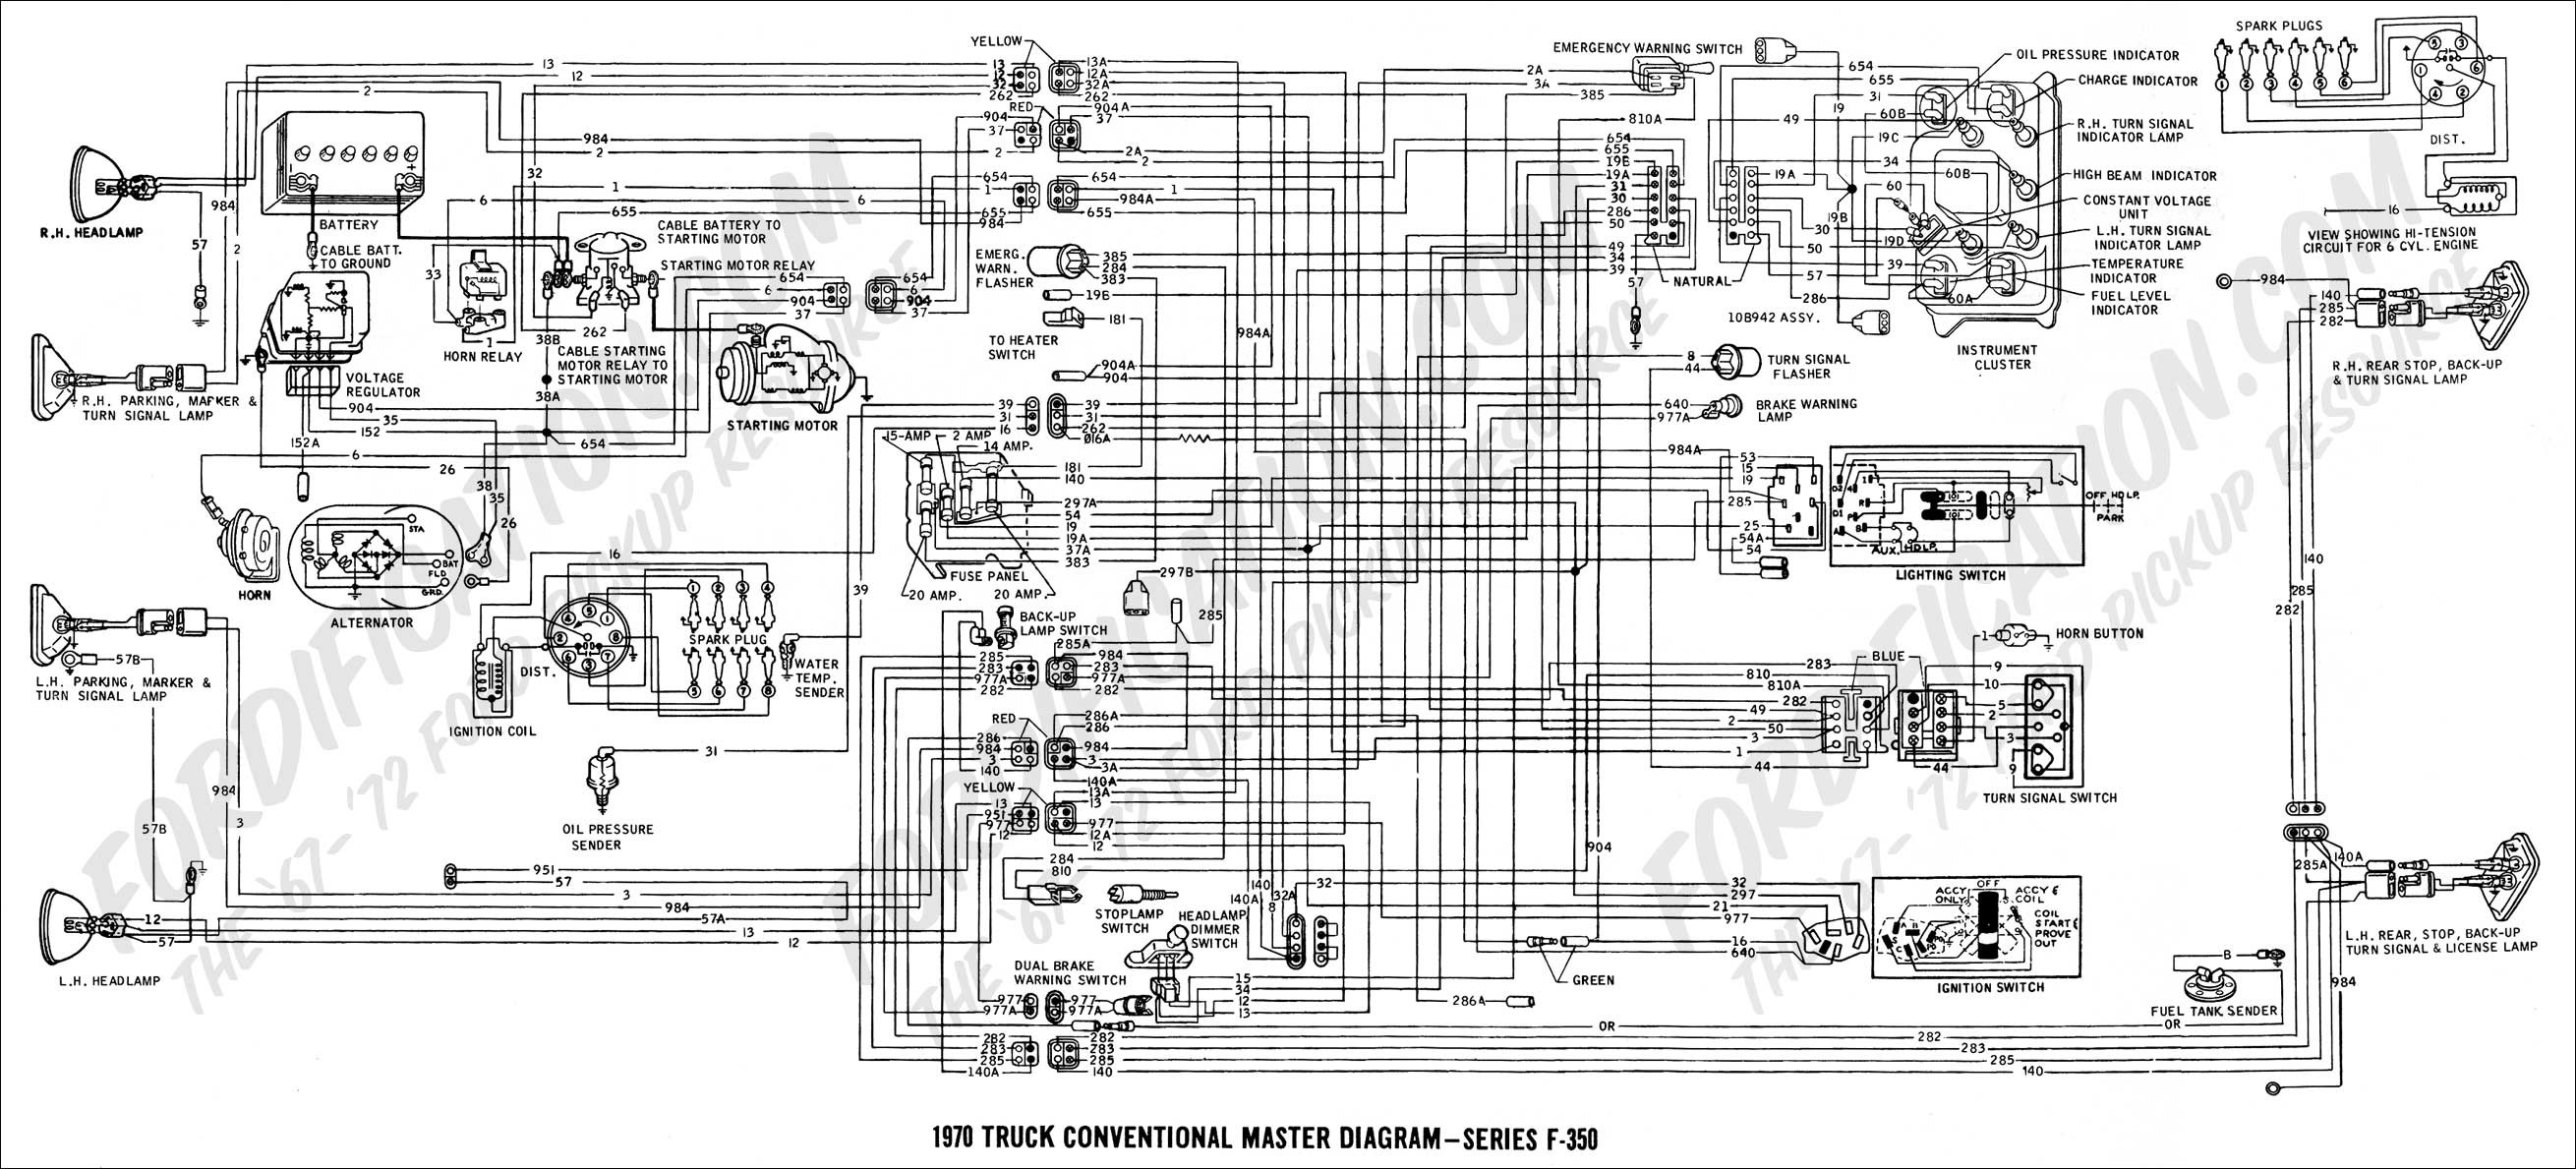 2007 ford Mustang Wiring Diagram attachment PHP attachmentid Stc 1 D for 2007 ford